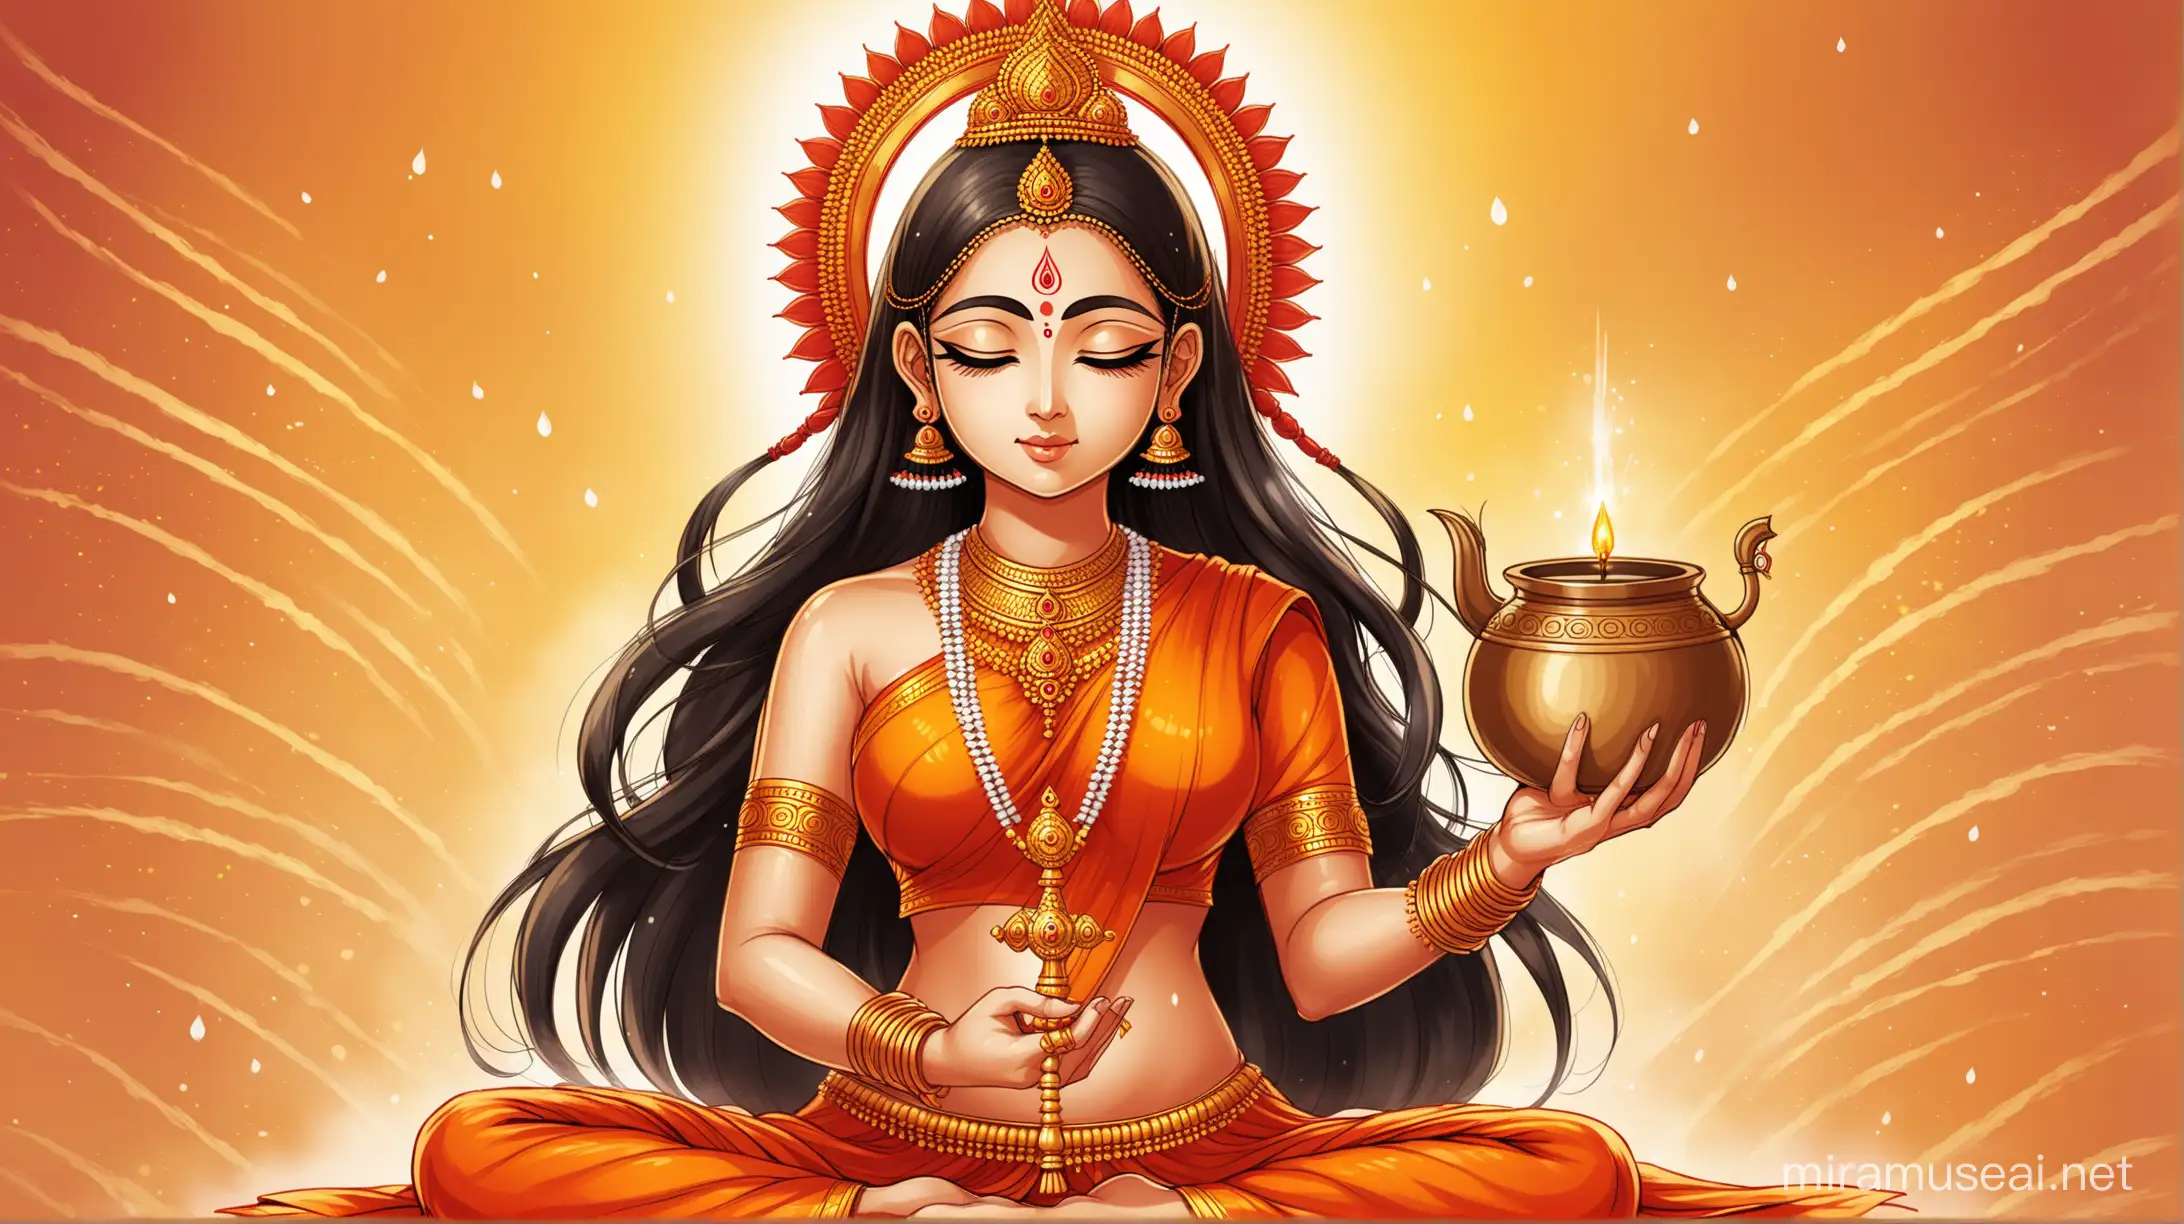 On Day -2, you can draw Brahmacharini, the second form of Goddess Durga. She is depicted as a meditative figure, holding a rosary and a water pot (kamandalu) in her hands, symbolizing penance and austerity.